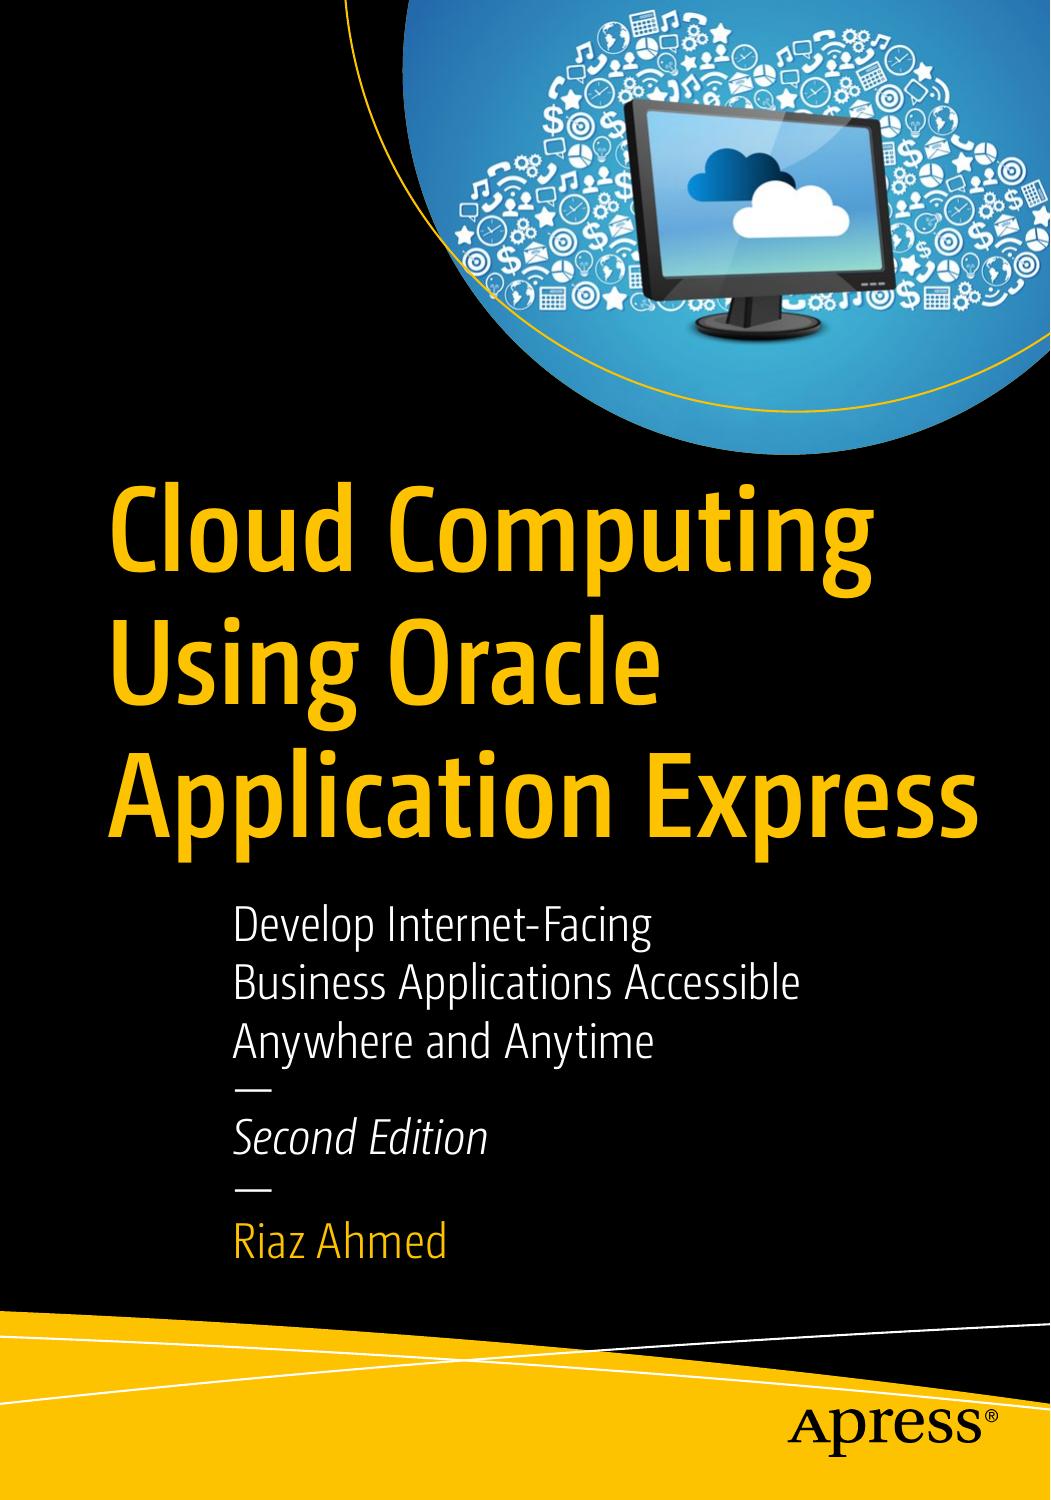 Cloud Computing Using Oracle Application Express Develop Internet-Facing Business Applications Accessible Anywhere and Anytime (2019